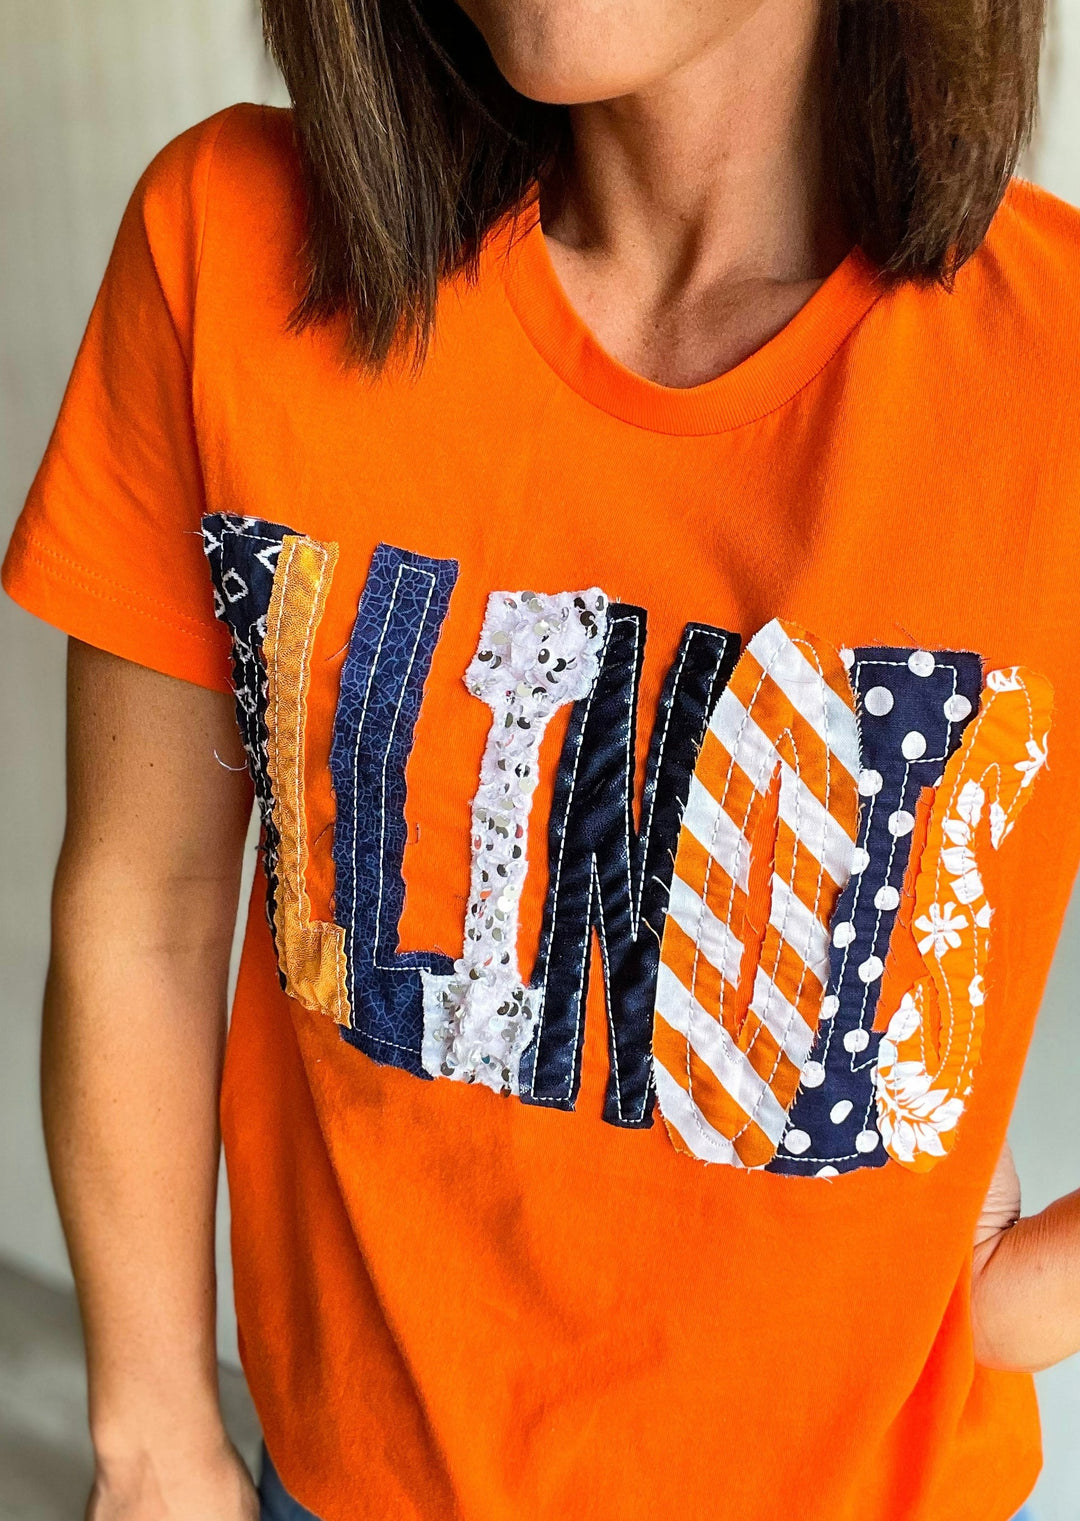 Orange Illinois T-shirt with navy, orange, and white sparkly letters.